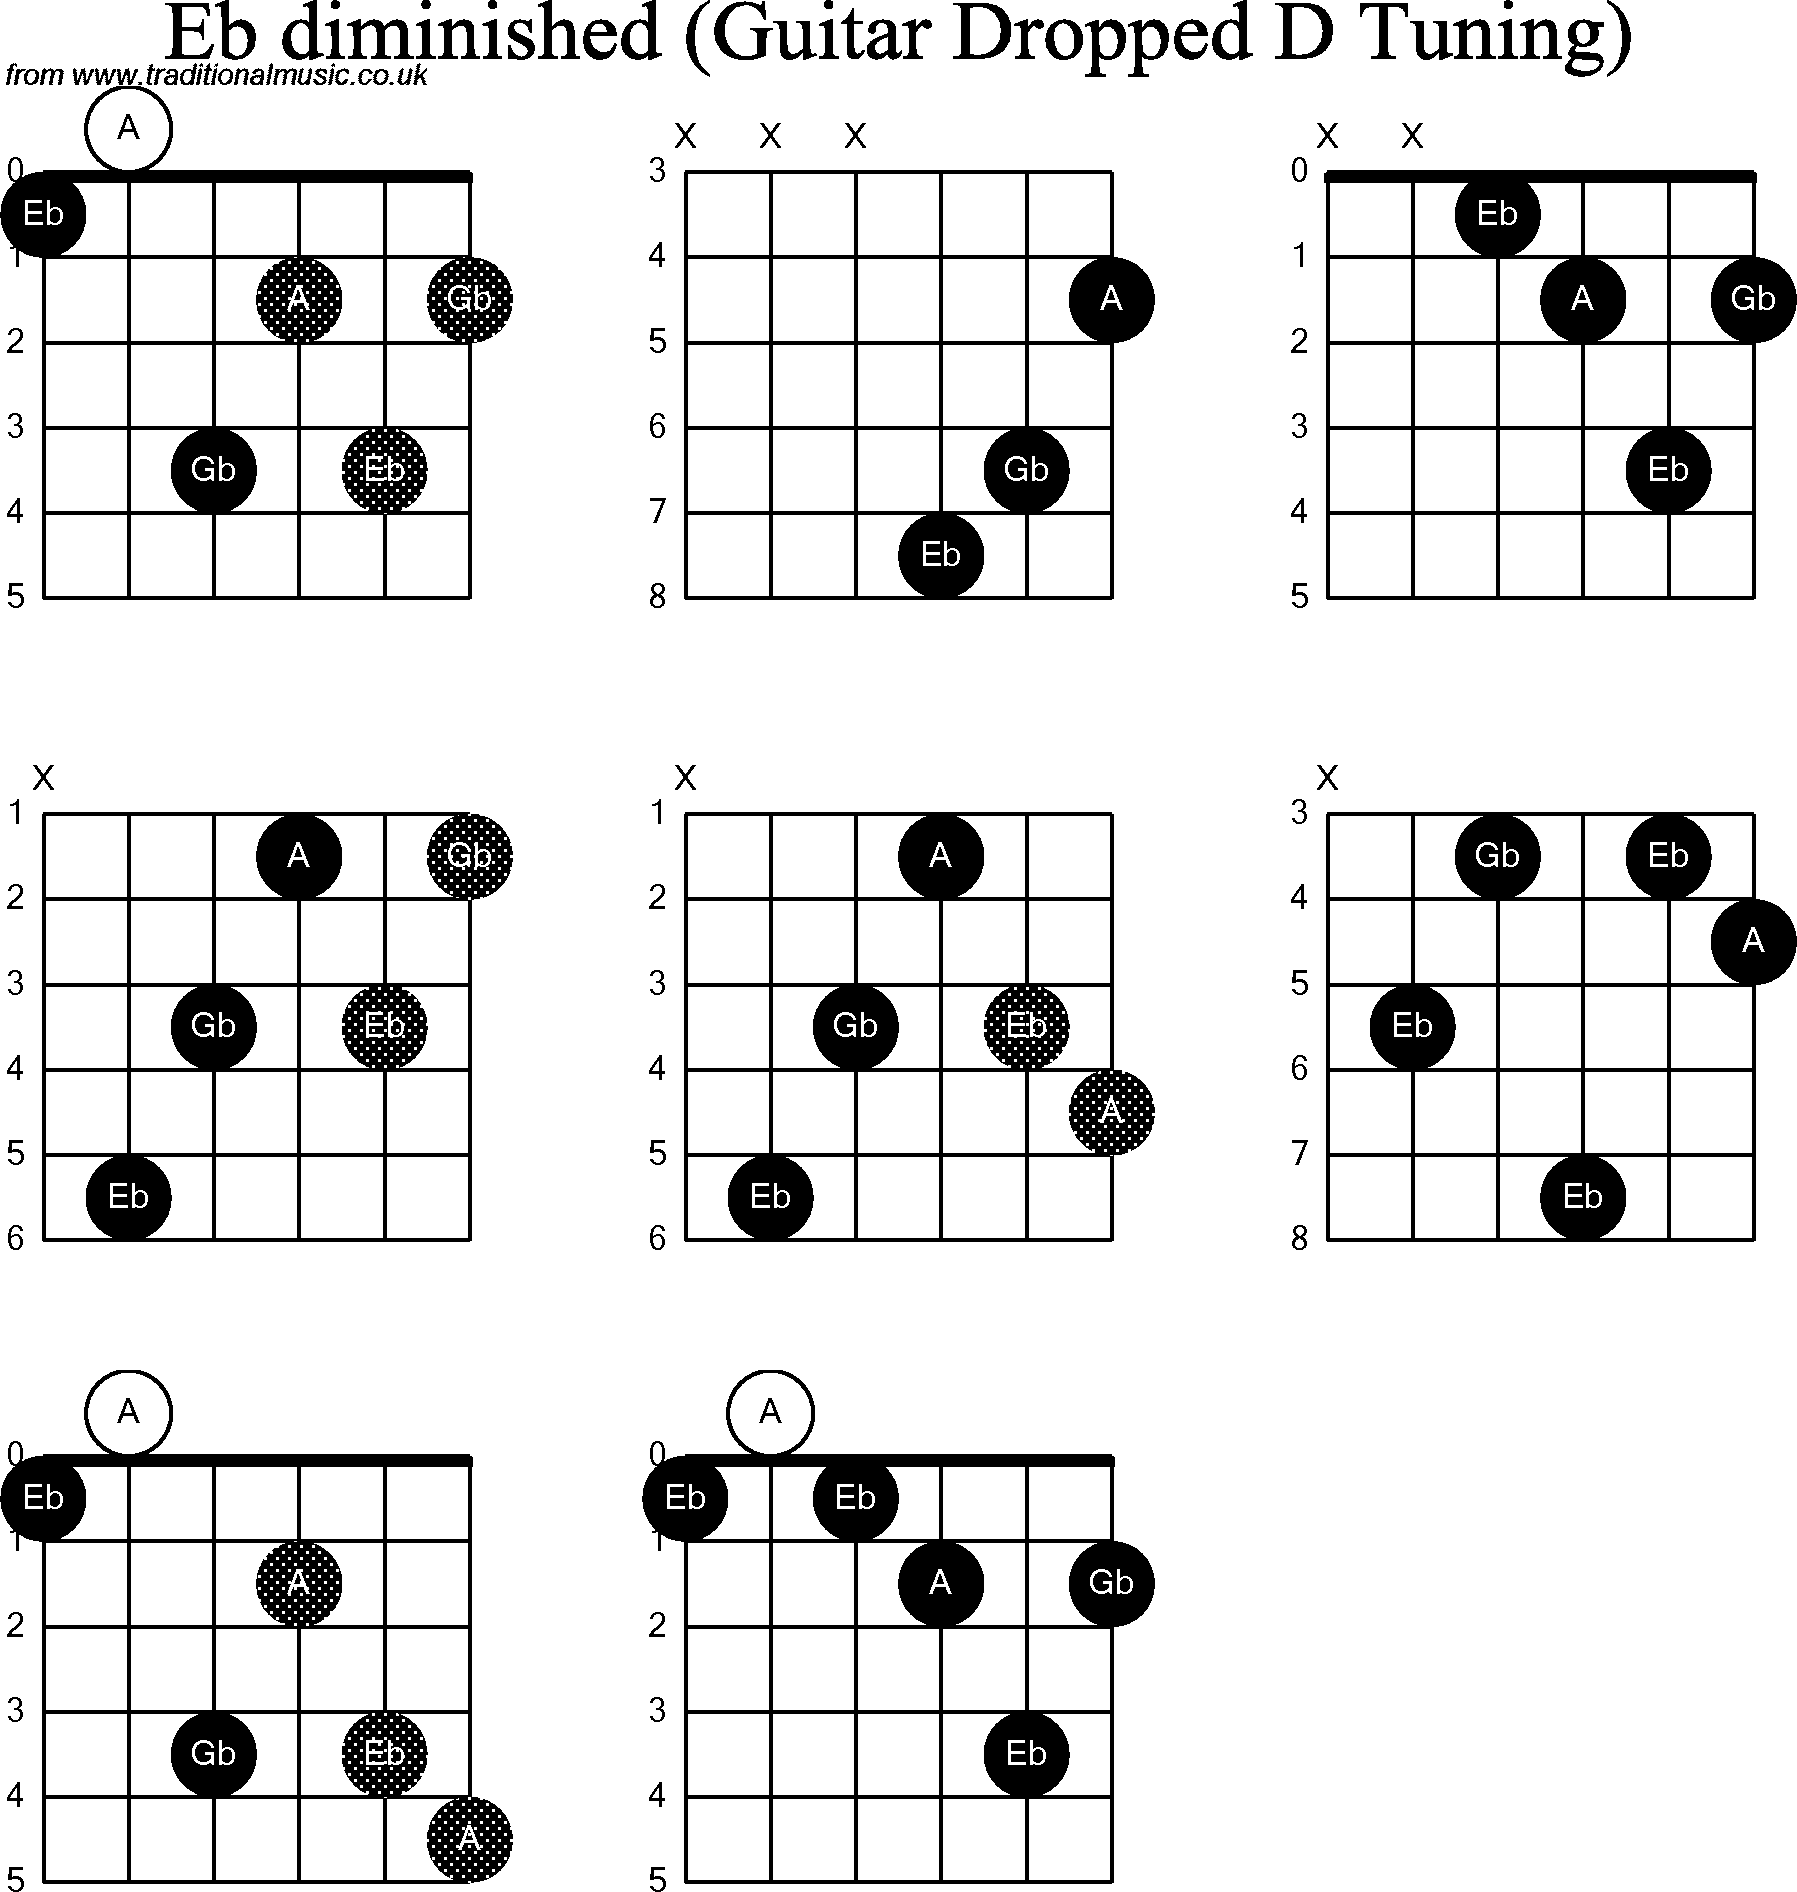 Chord diagrams for Dropped D Guitar(DADGBE), C Major7th